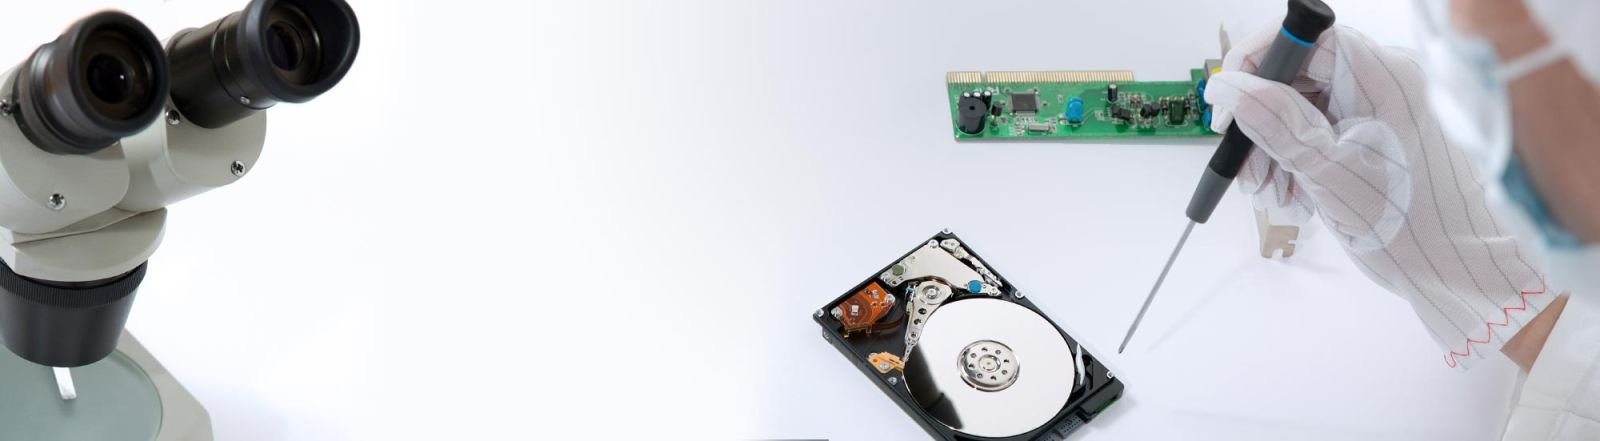 hard drive data recovery, best free data recovery software